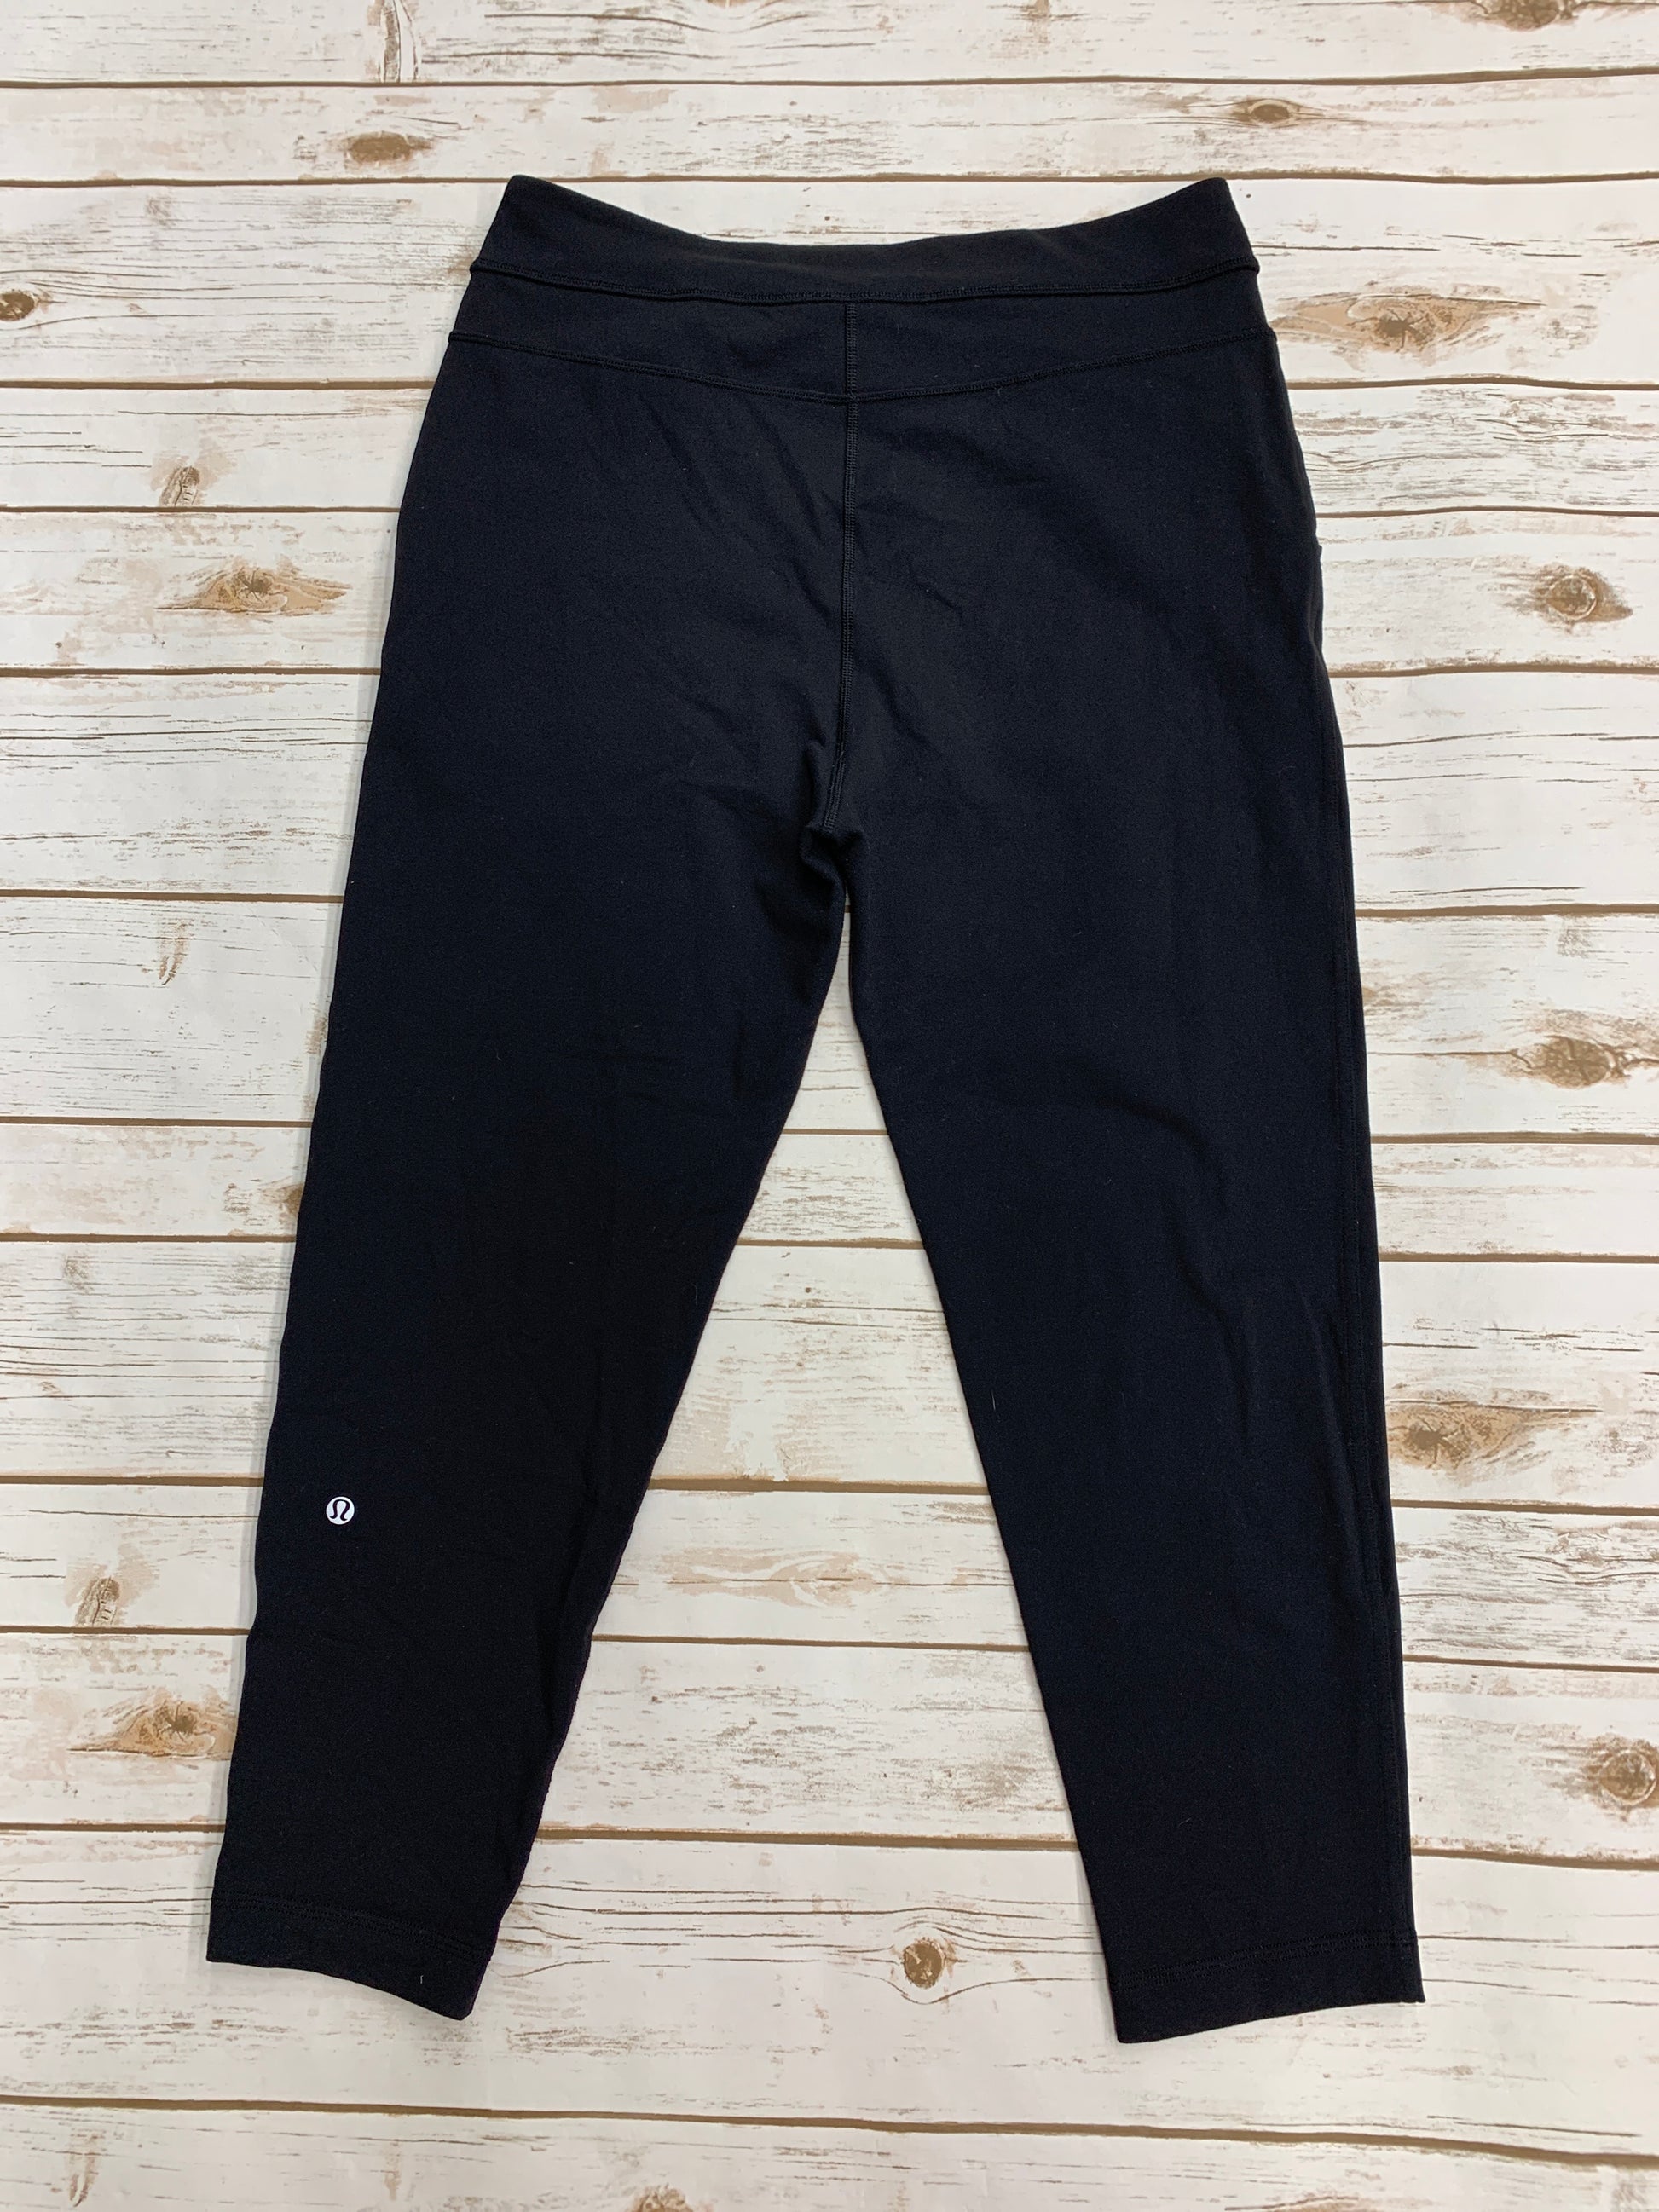 Athletic Pants By Lululemon Size: 6 – Clothes Mentor Peoria IL #220